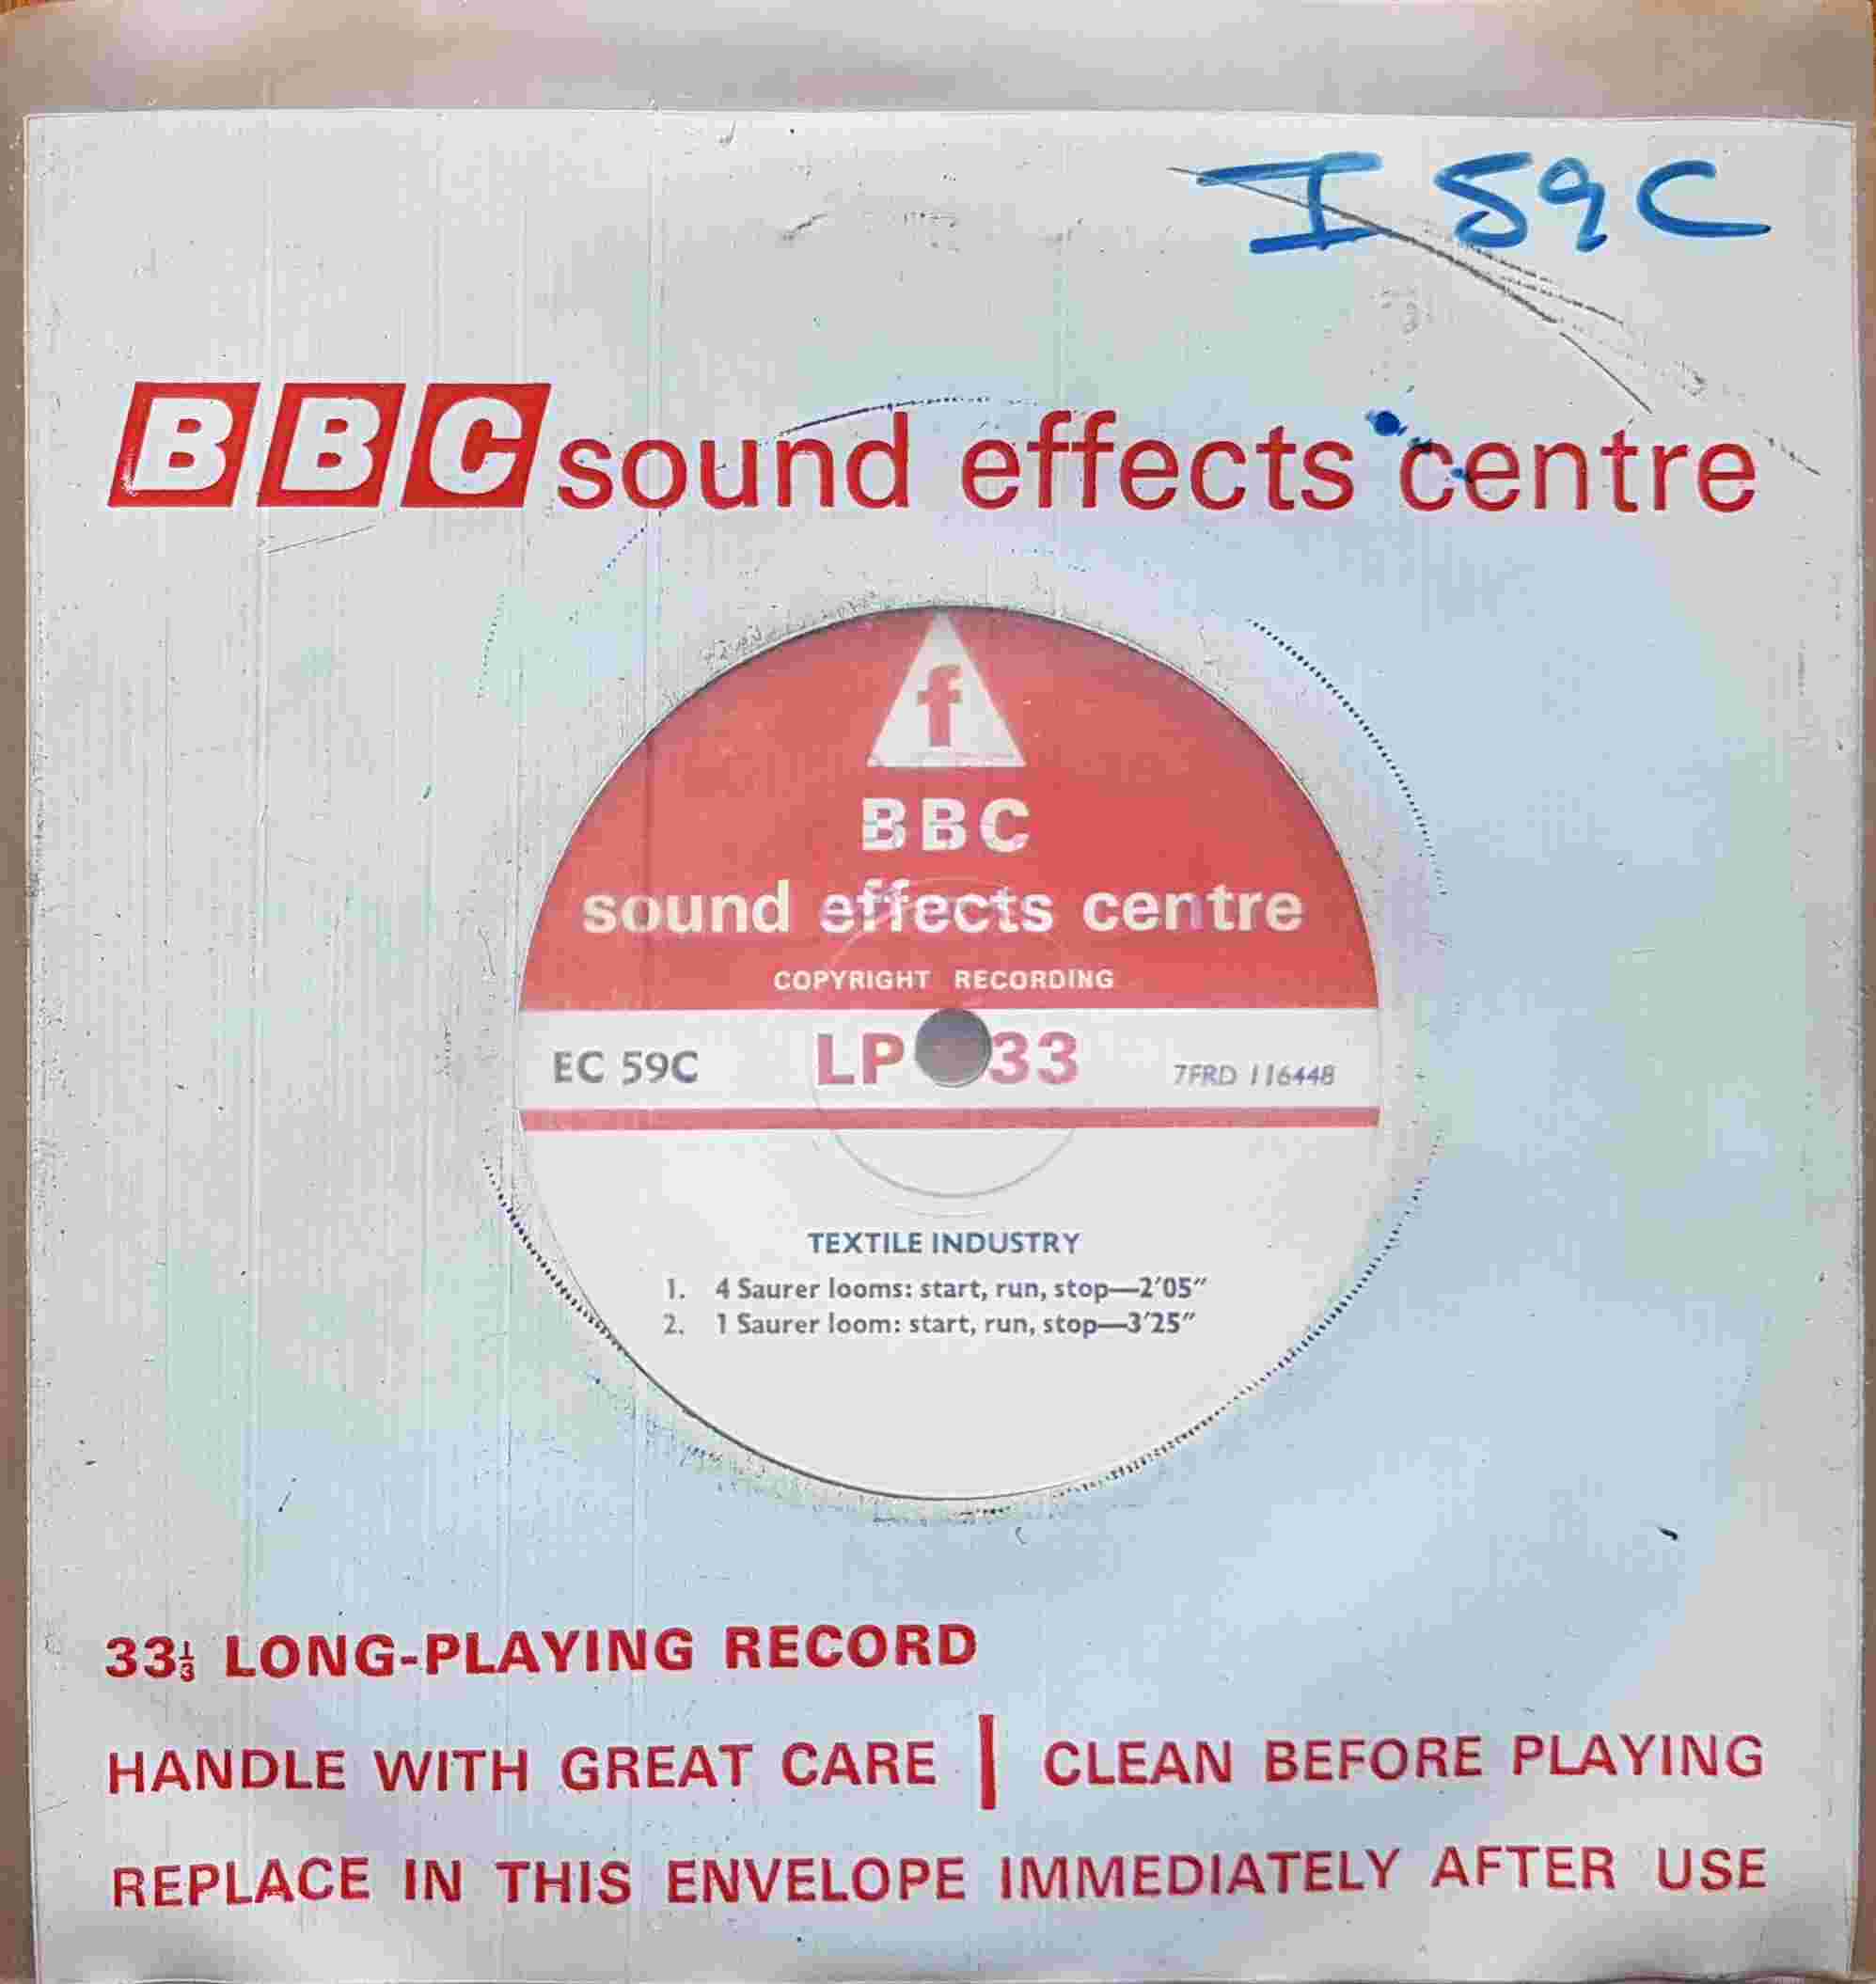 Picture of EC 59C Textile industry by artist Not registered from the BBC singles - Records and Tapes library